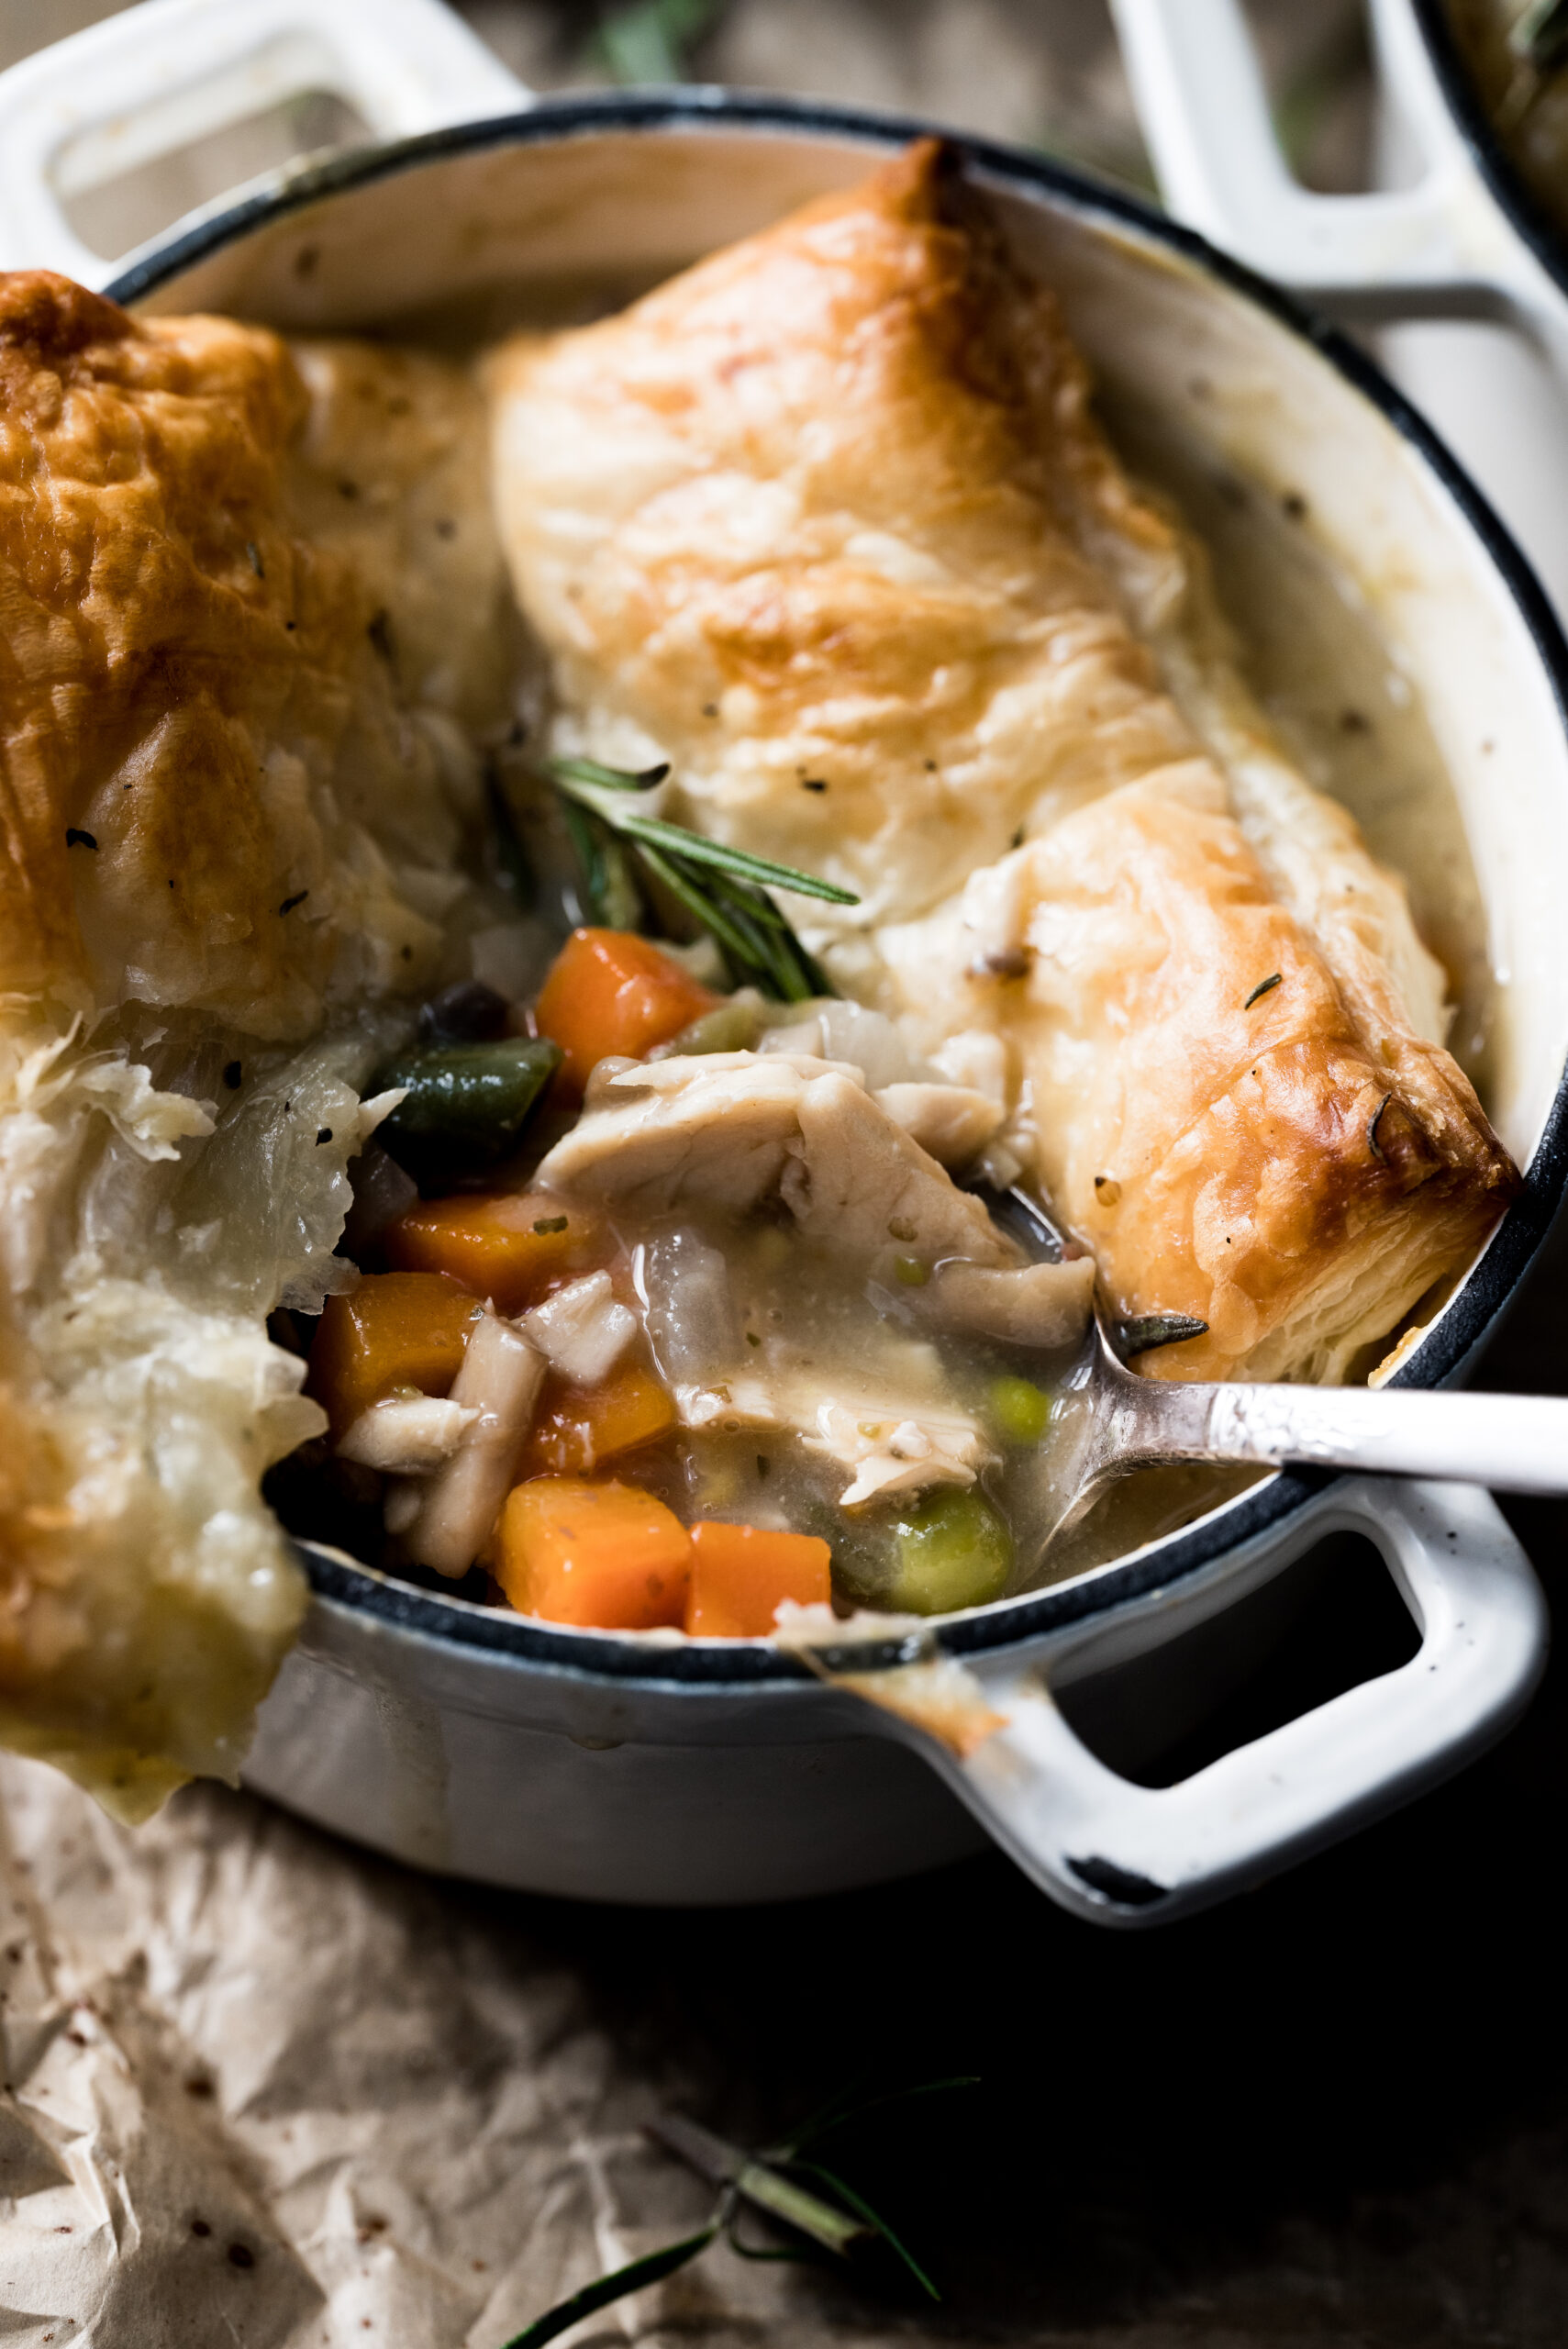 Turkey Pot Pie made with leftover turkey and a puff pastry